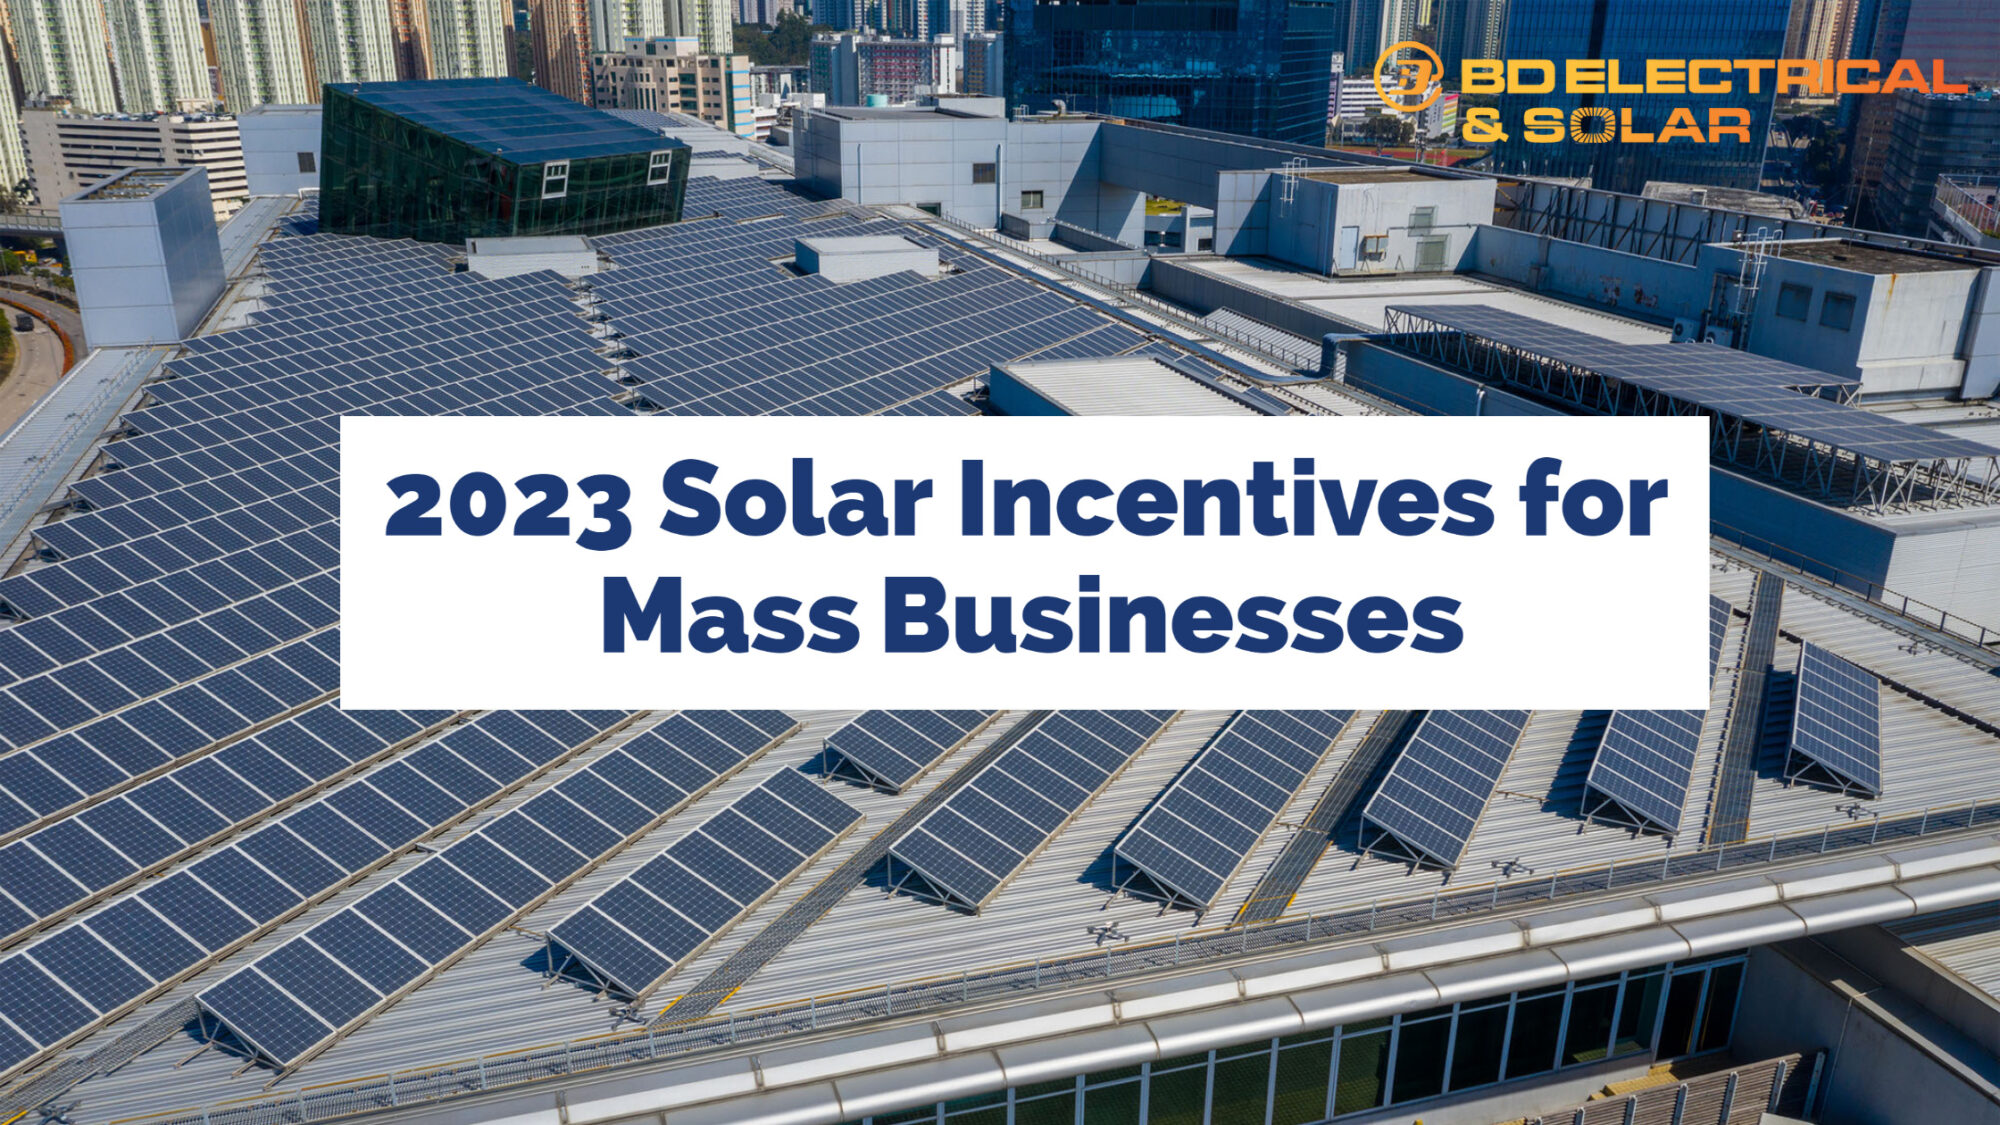 Picture of solar panels on commercial business with the text "2023 Solar Incentives for Mass Businesses"